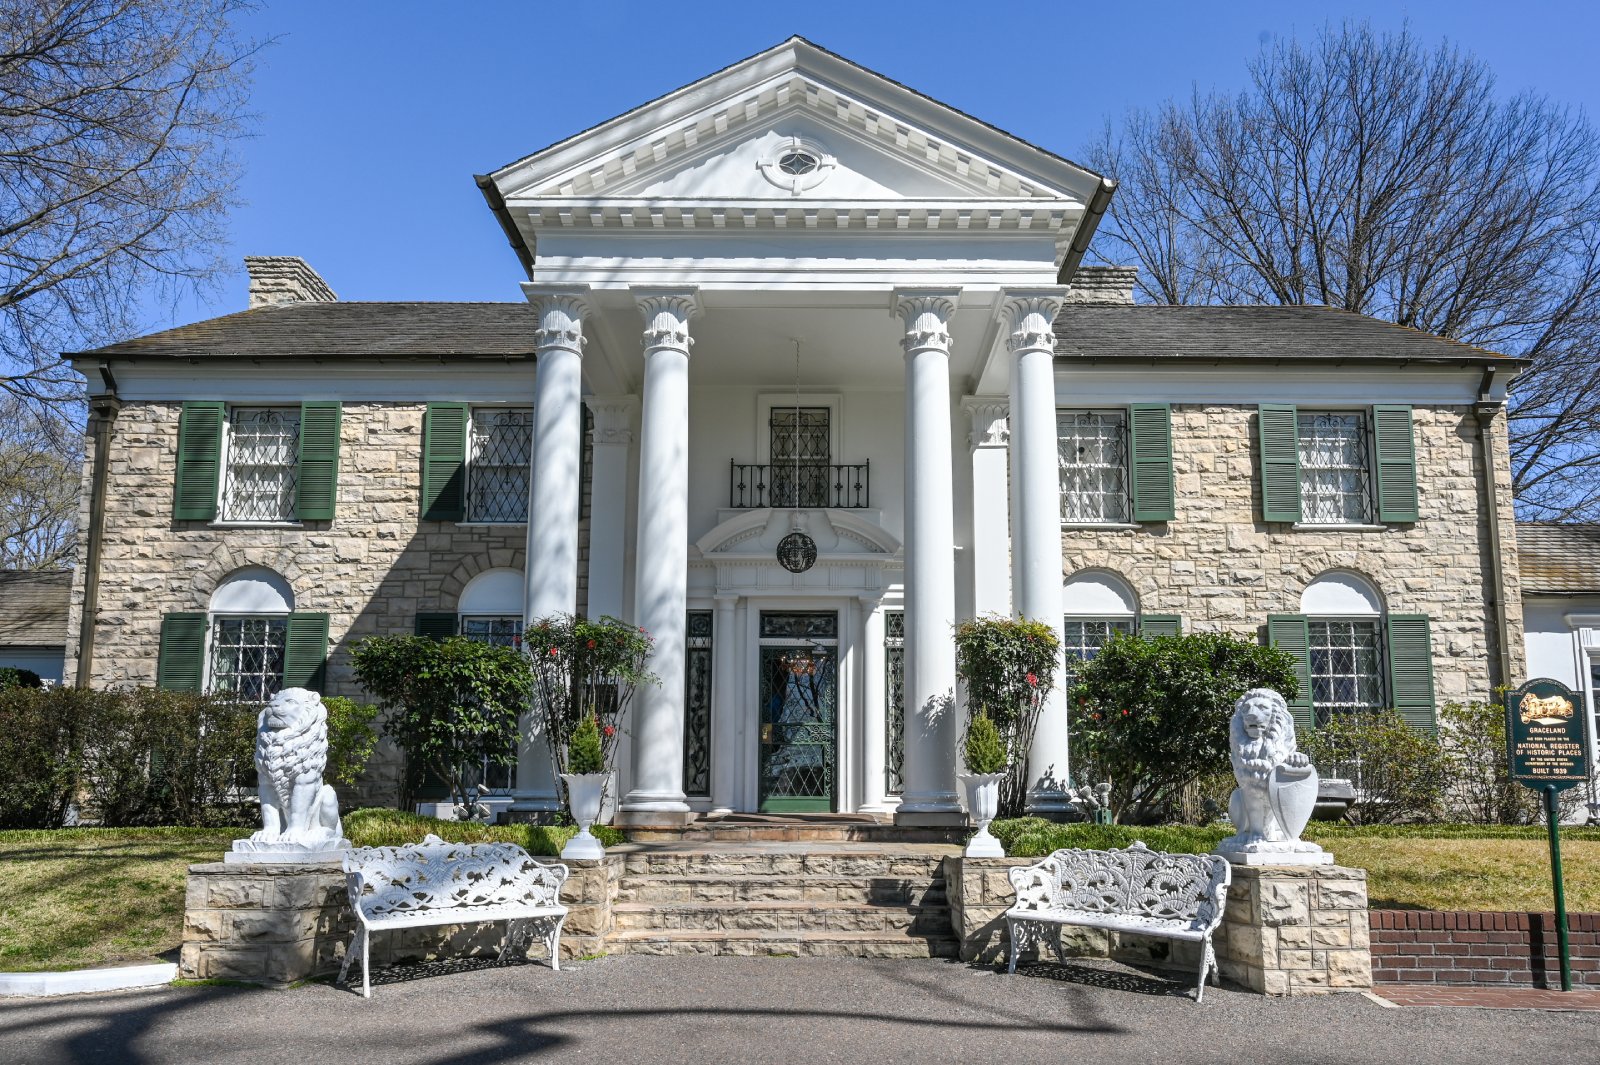 Image Credit: Shutterstock / Rolf_52 <p><span>Located in Gatlinburg, this museum and garden bring the story of Christ to life with realistic wax figures and settings, providing an educational and inspirational experience.</span></p>